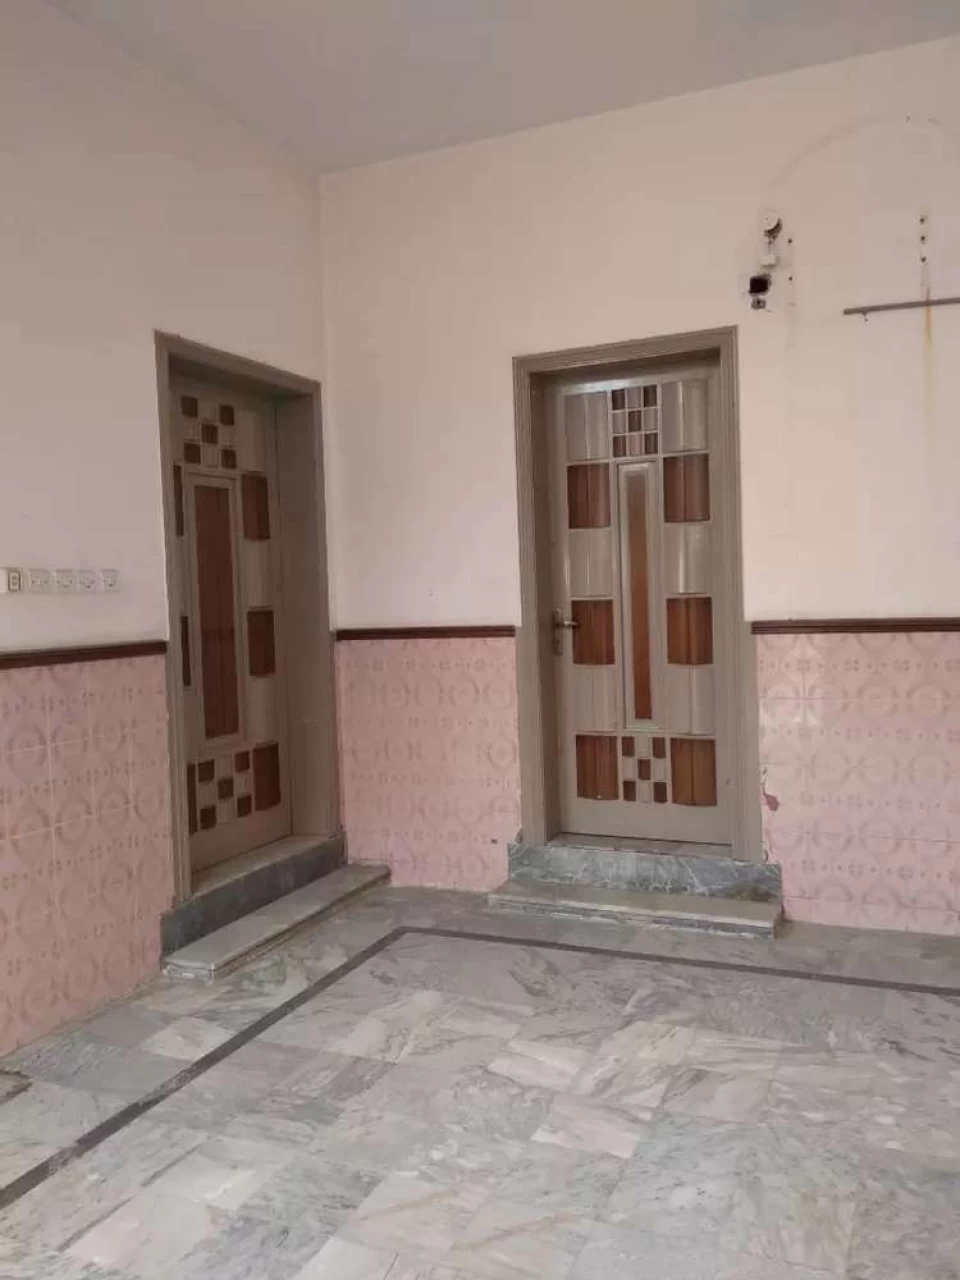 House for rent in rachna town satayana road faisalabad